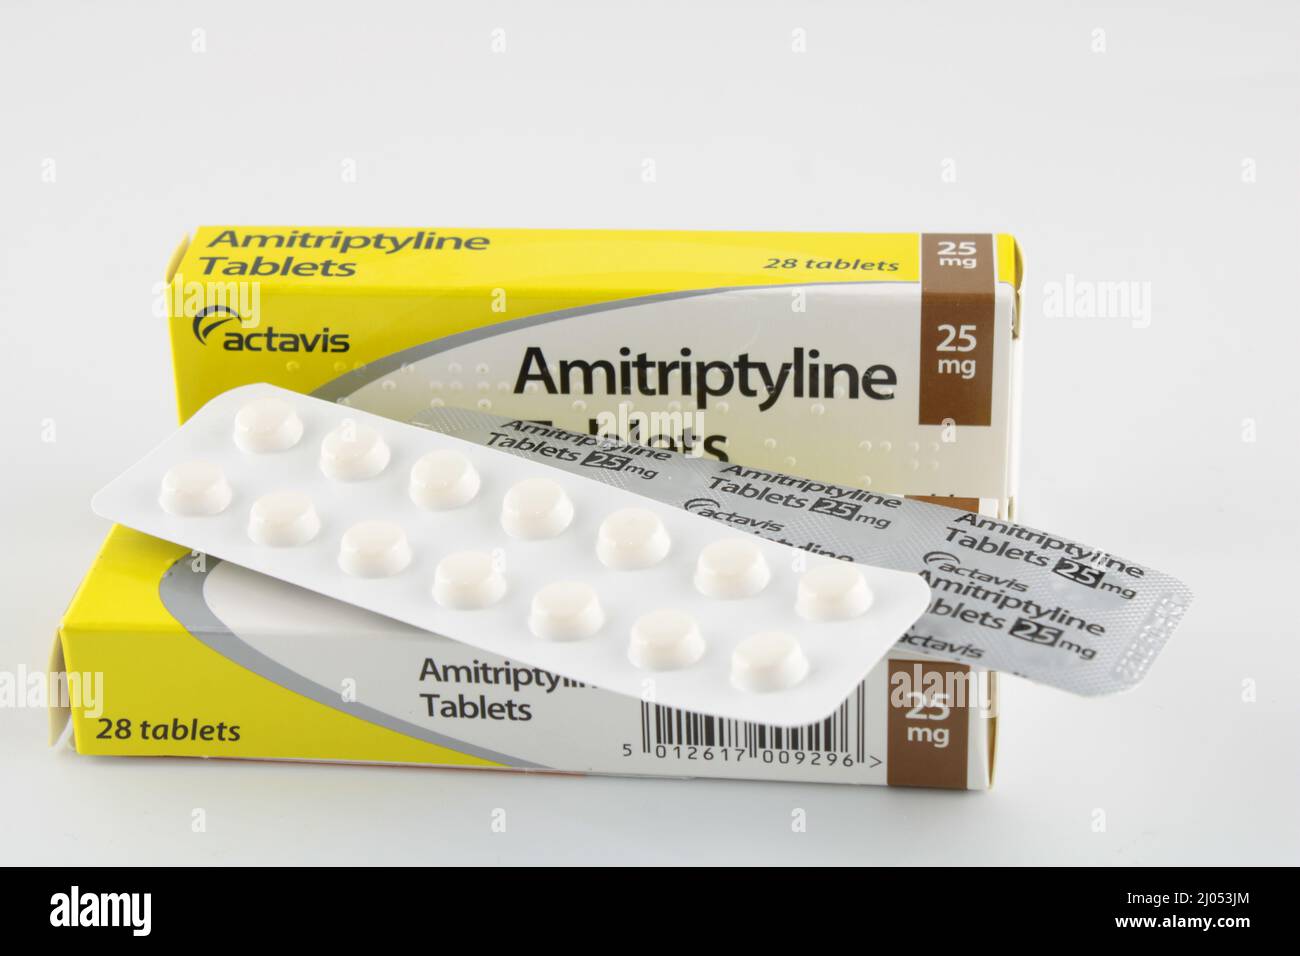 Amitriptyline tablets 25mg prescribed to treat depression, mental health concept. Stock Photo